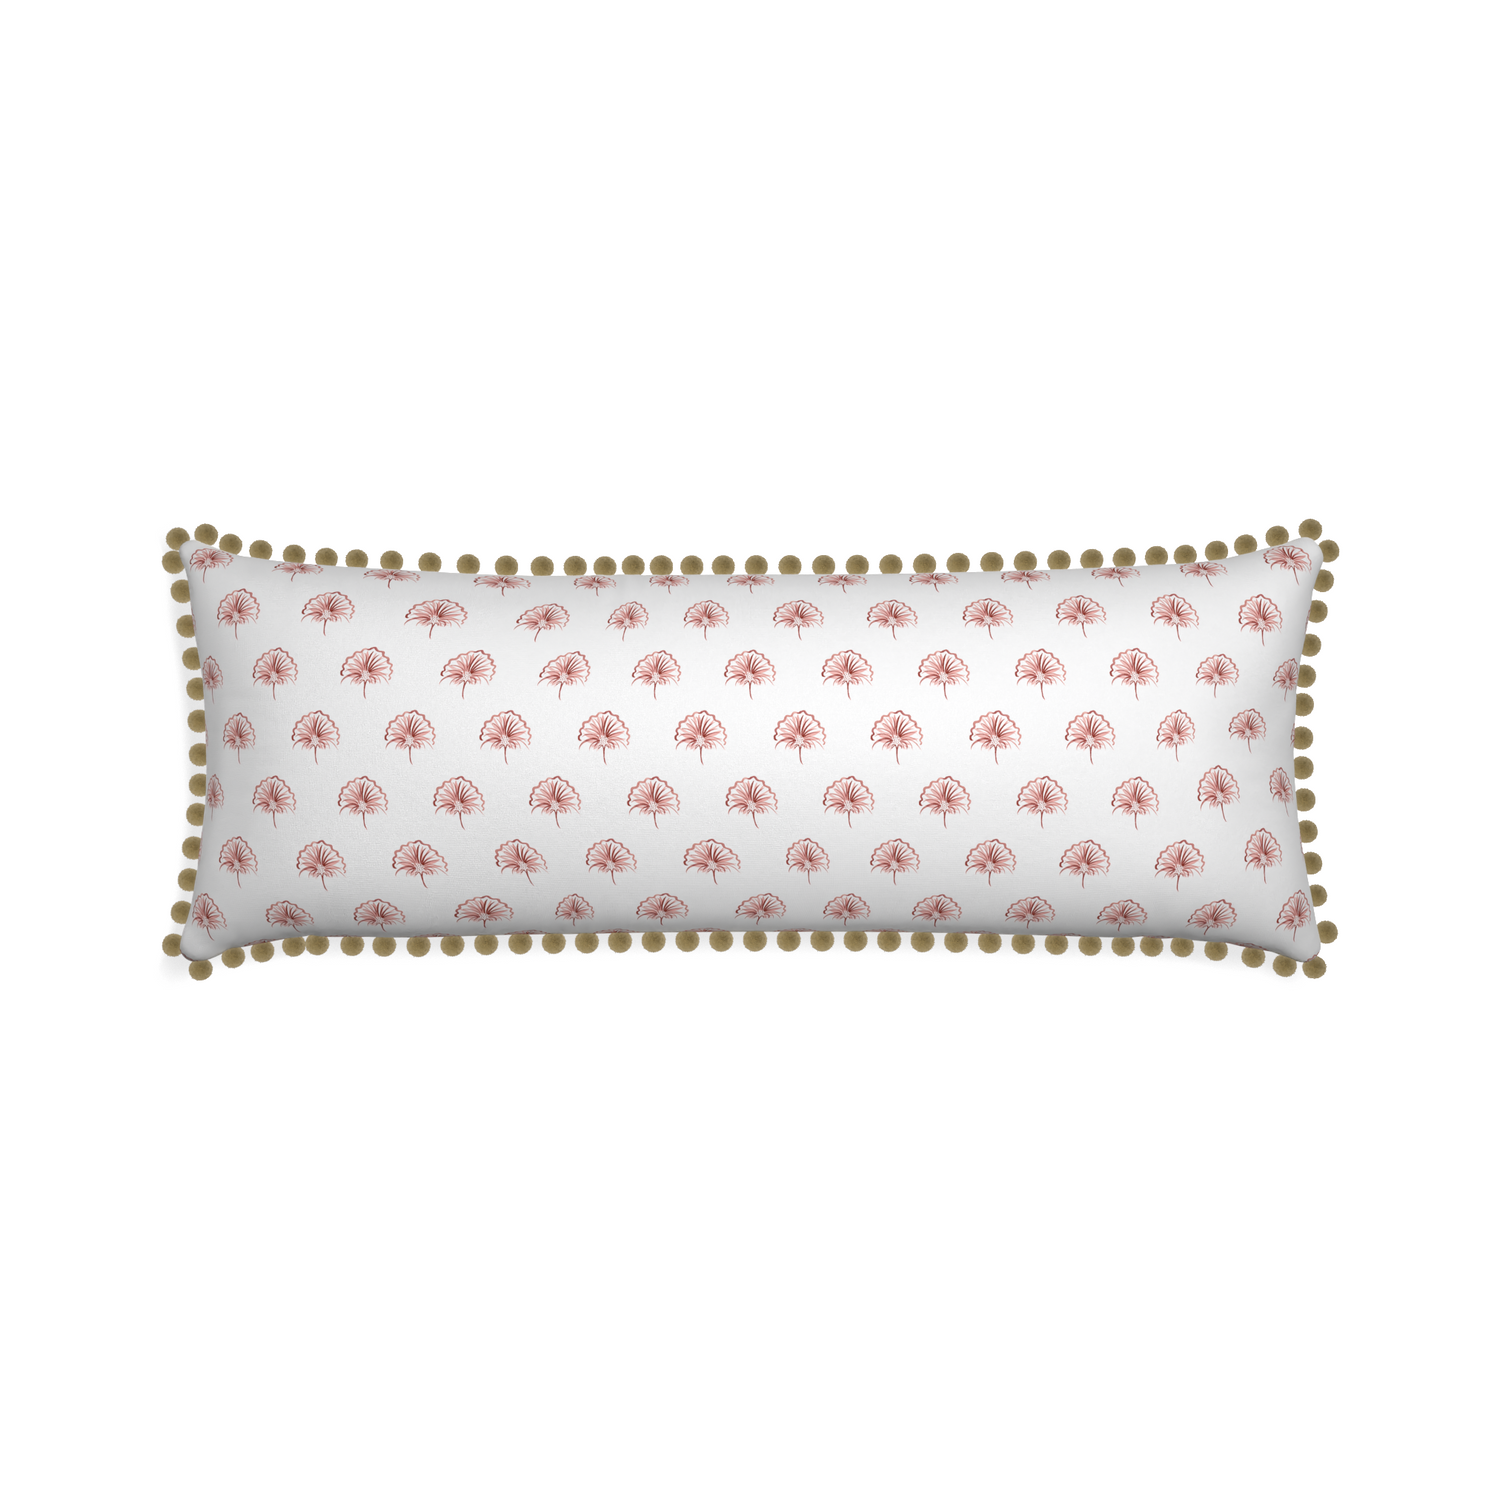 Xl-lumbar penelope rose custom floral pinkpillow with olive pom pom on white background